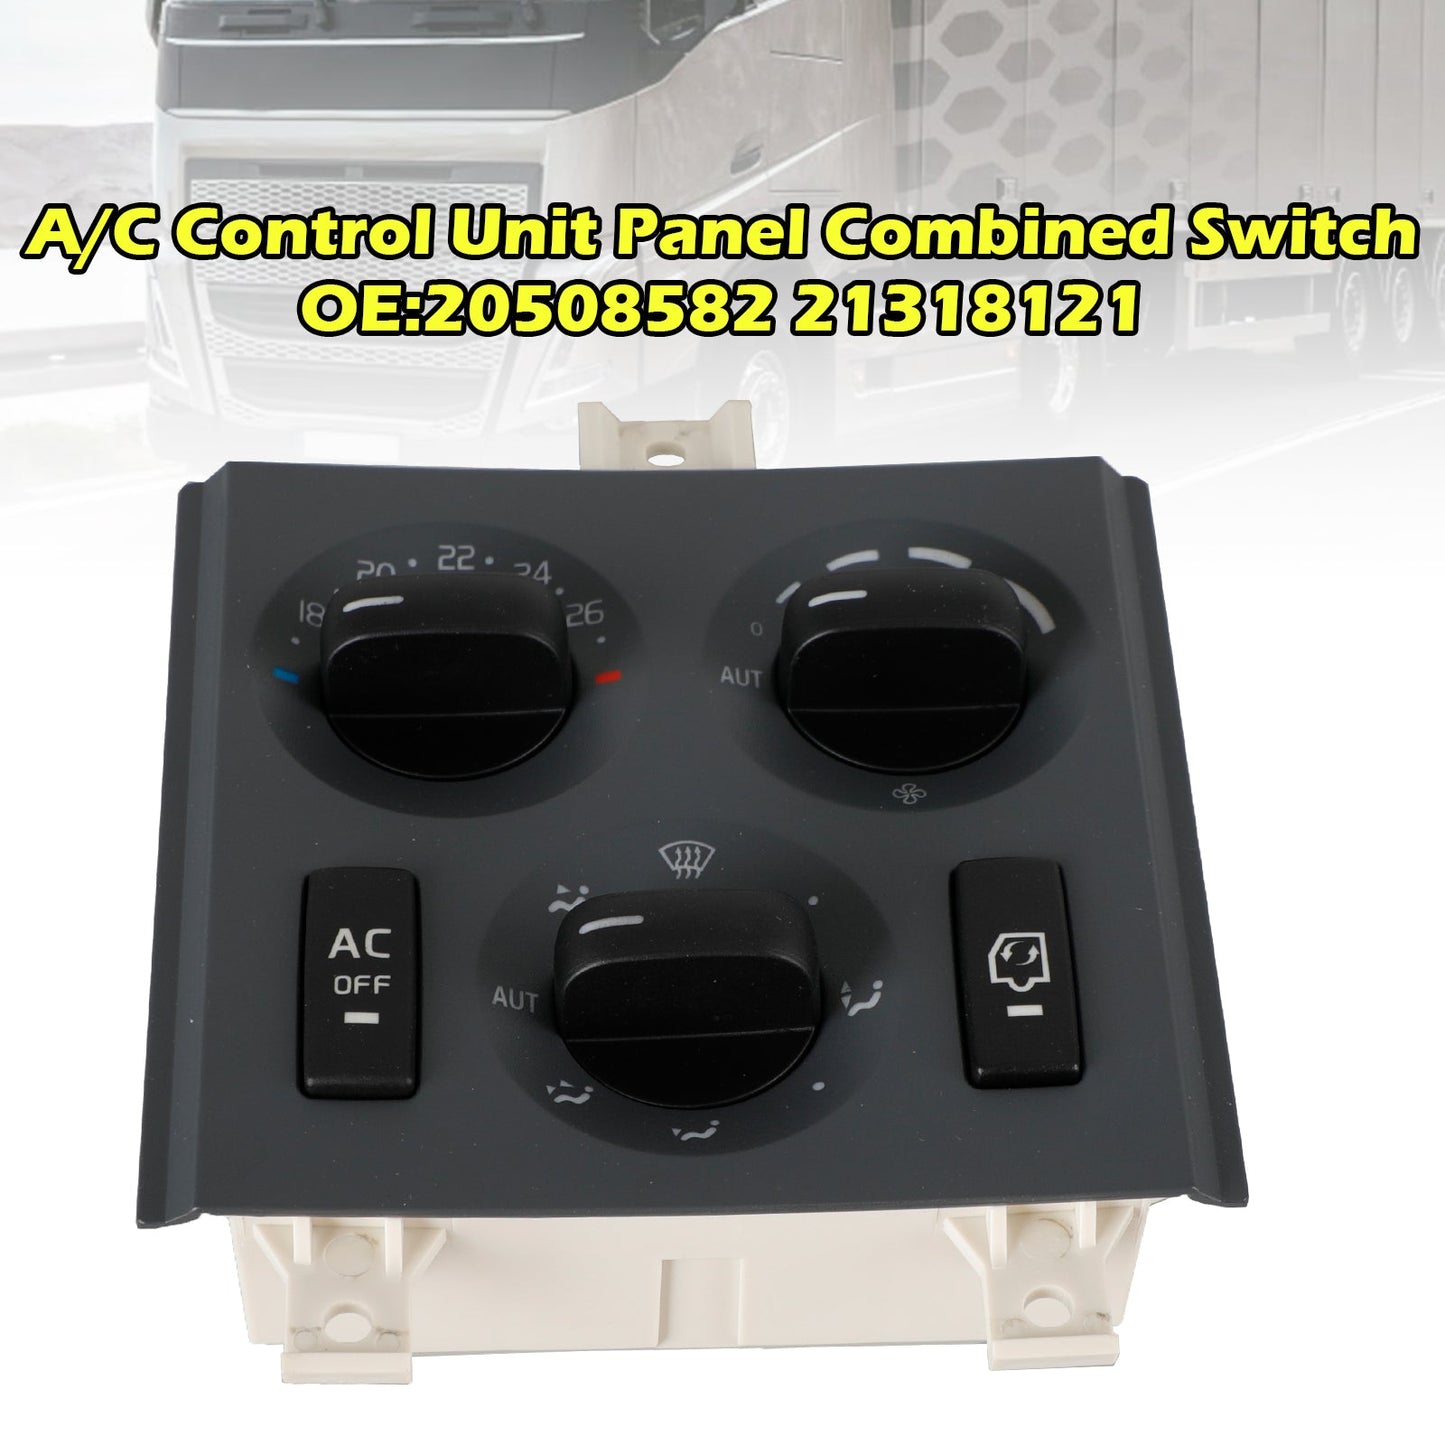 A/C Control Unit Panel Combined Switch for Volvo Truck FM FH 20508582 21318121